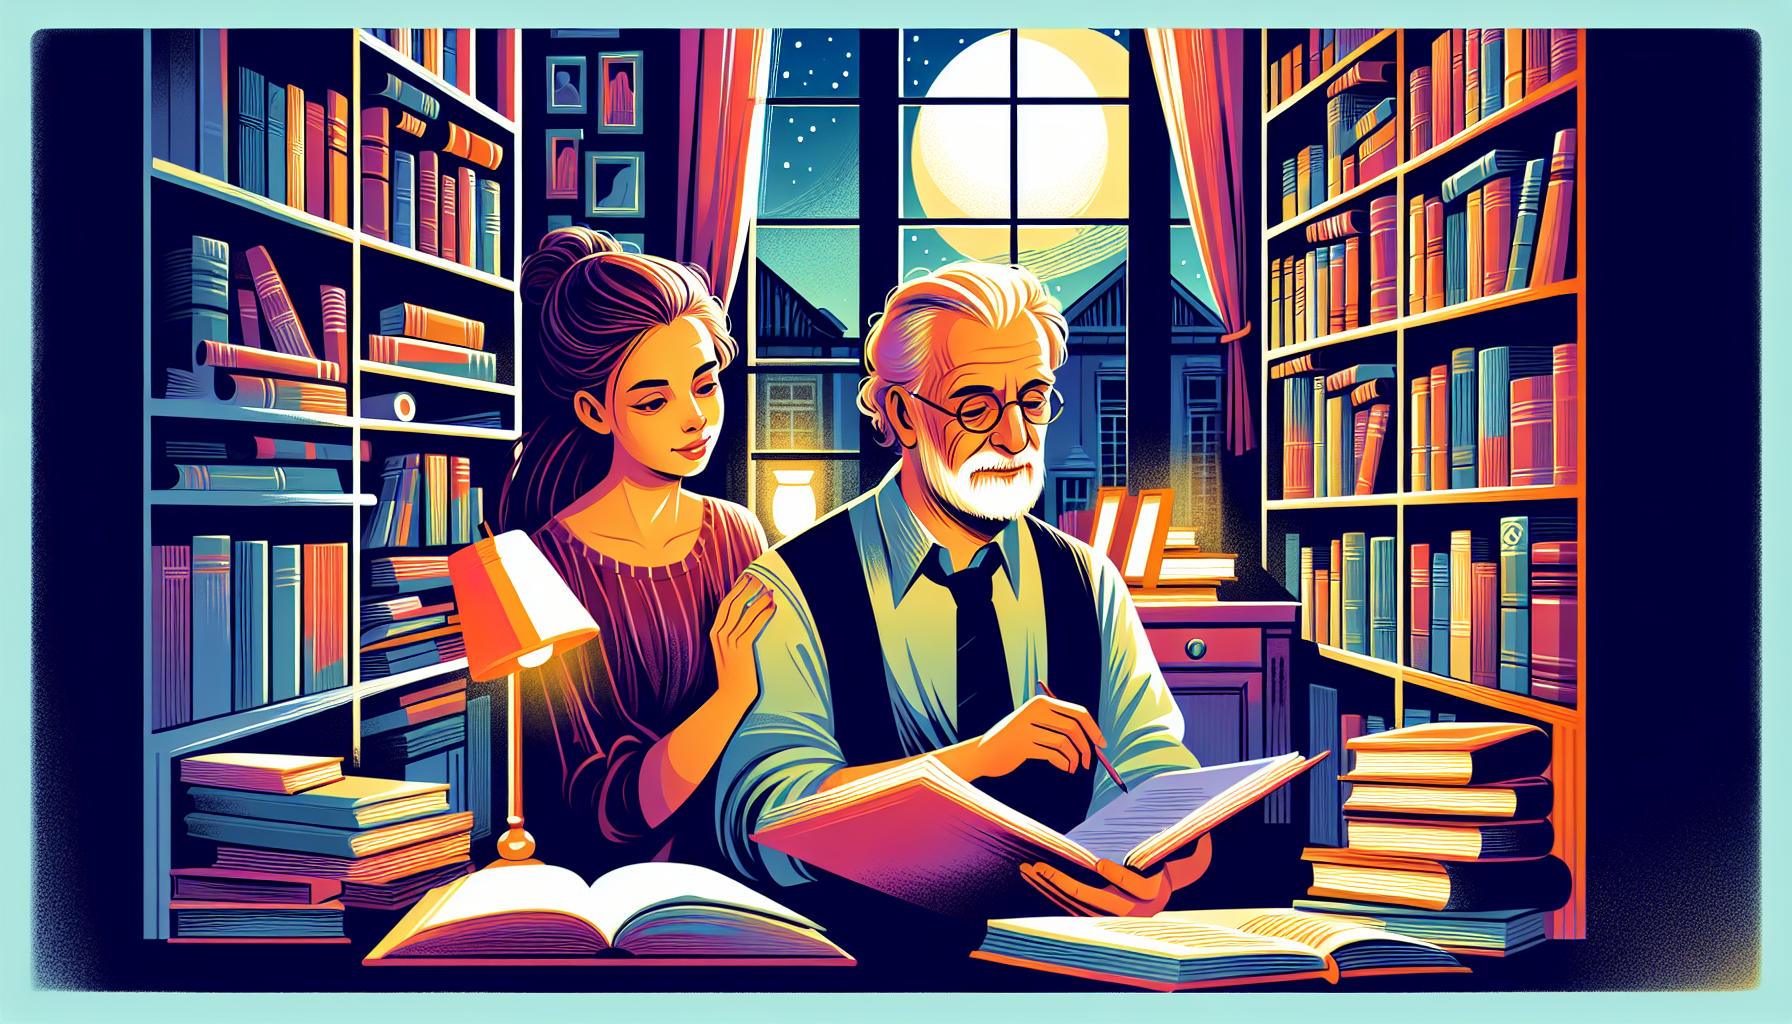 An inspiring scene of an experienced author in a cozy, book-filled study, mentoring a young, enthusiastic writer, both looking at a manuscript under a soft lamp light, with shelves of books surroundin